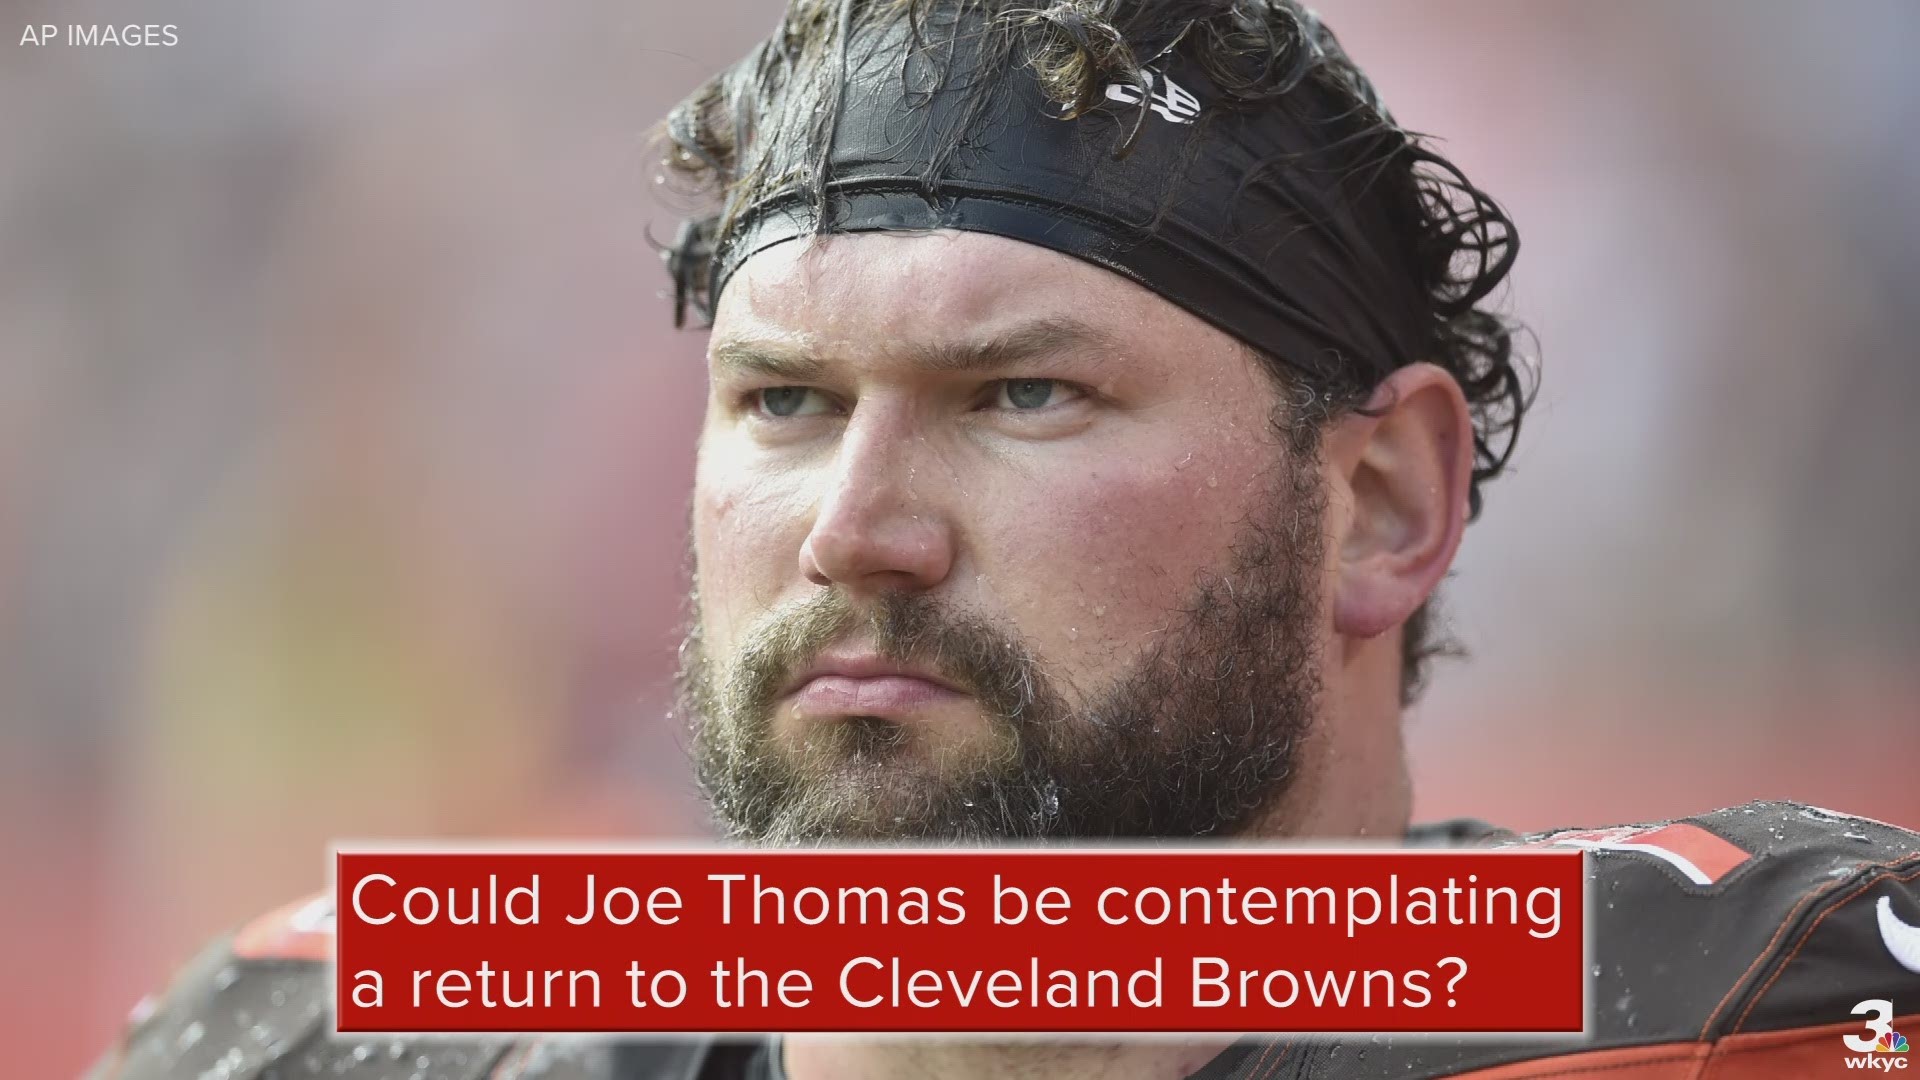 After recent offseason moves, the Twitter universe is questioning whether Joe THomas will make a return to the Cleveland Browns.